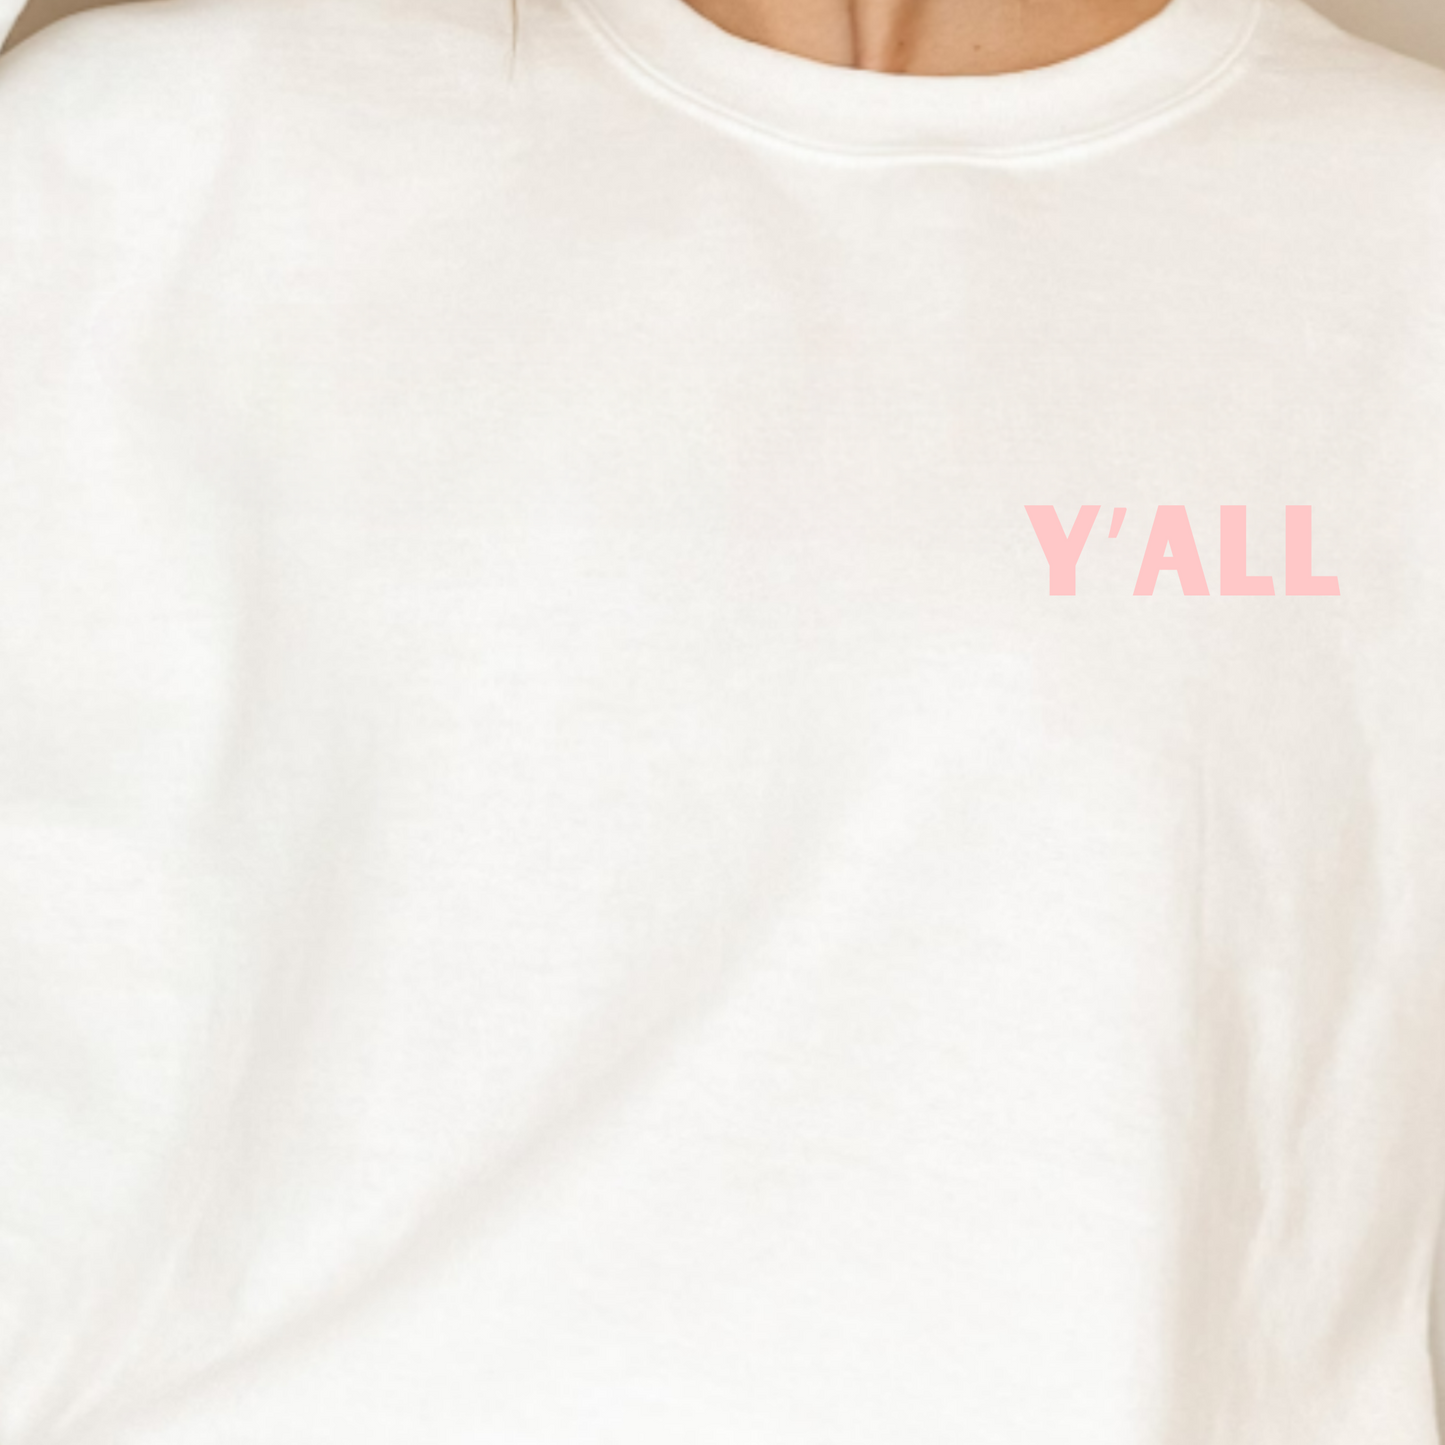 (shirt not included) Y'all in PINK - Matte Clear Film Transfer